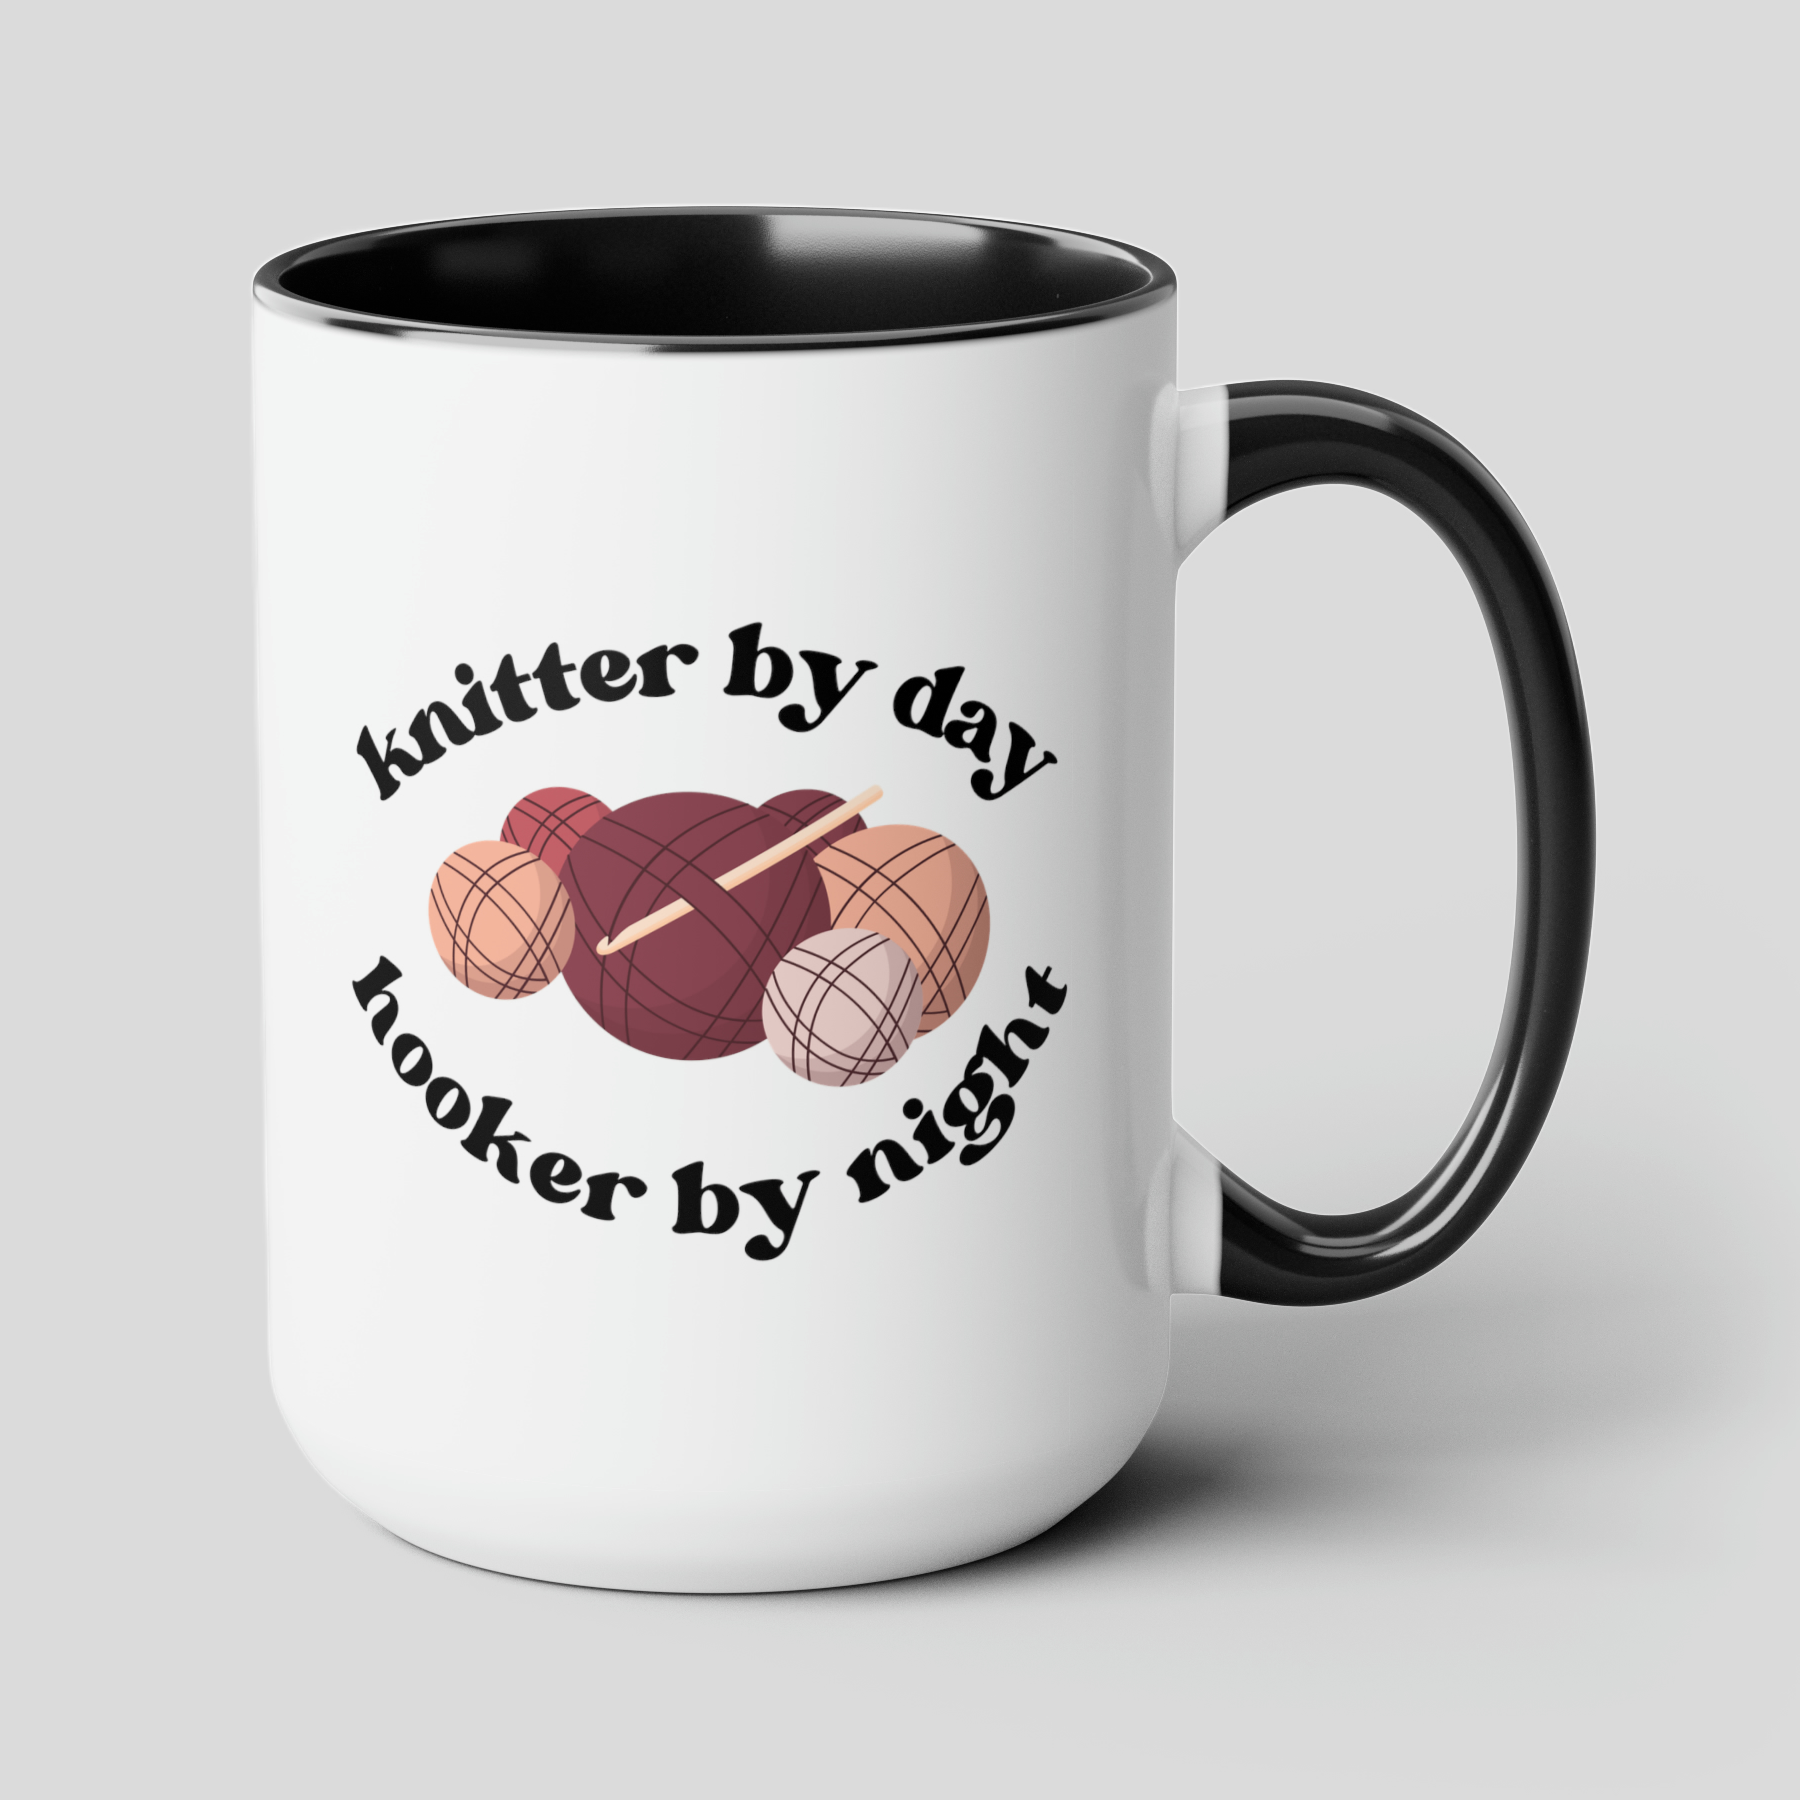 Knitter By Day Hooker By Night 15oz white with black accent funny large coffee mug gift for mom mother's day wool knitting novelty rude joke waveywares wavey wares wavywares wavy wares cover